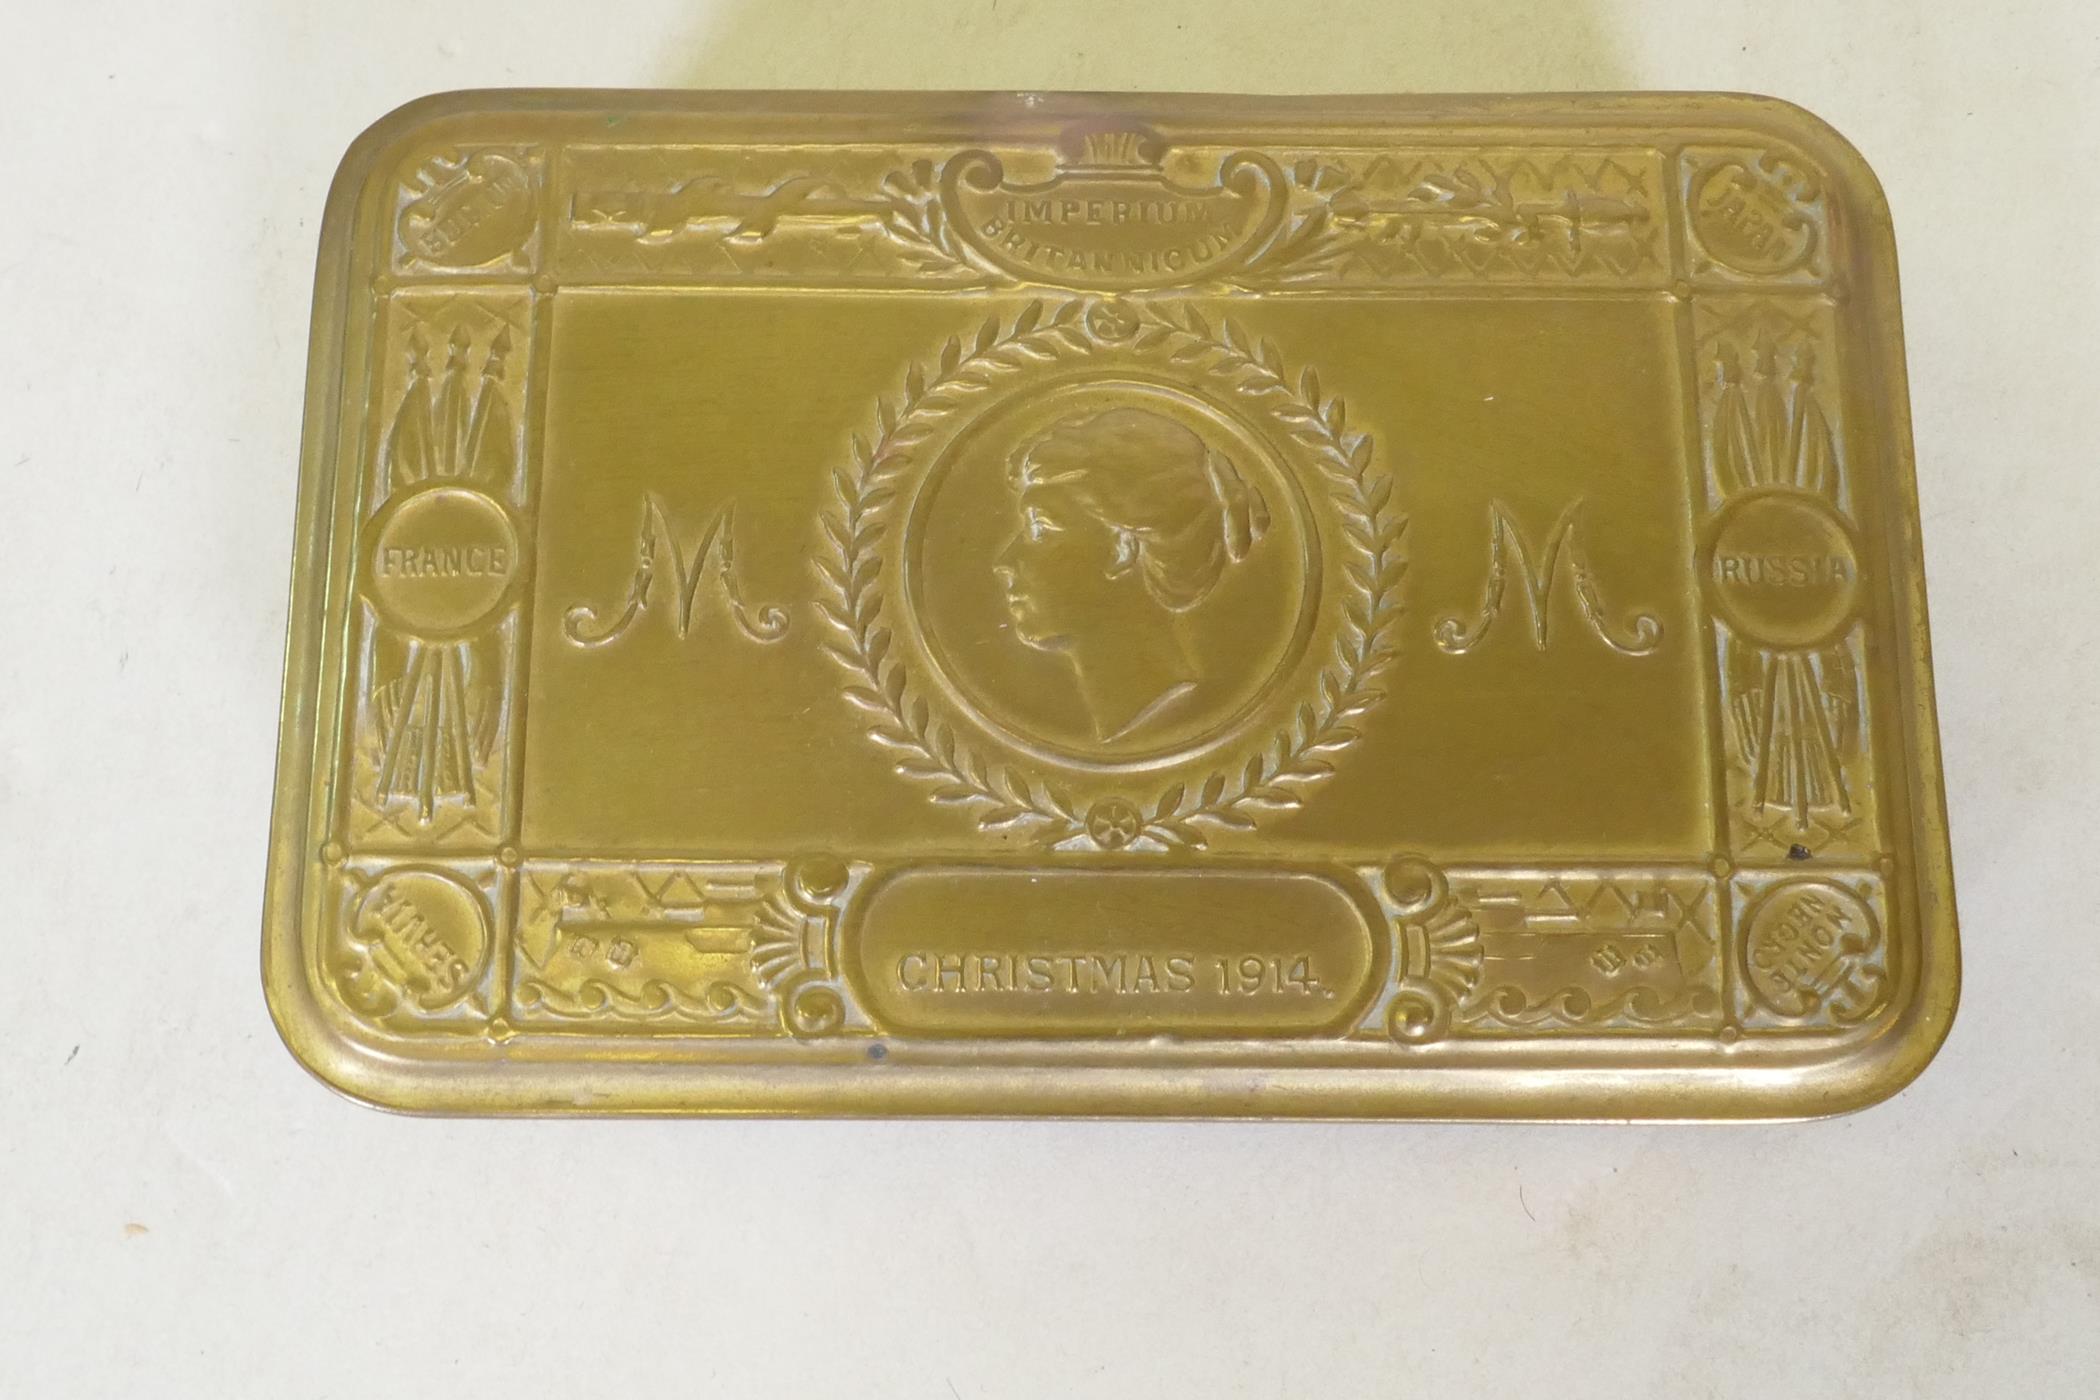 A WWI Christmas 1914 Princess Mary gift tin, with cigarettes and unopened tobacco, and greetings - Image 3 of 3